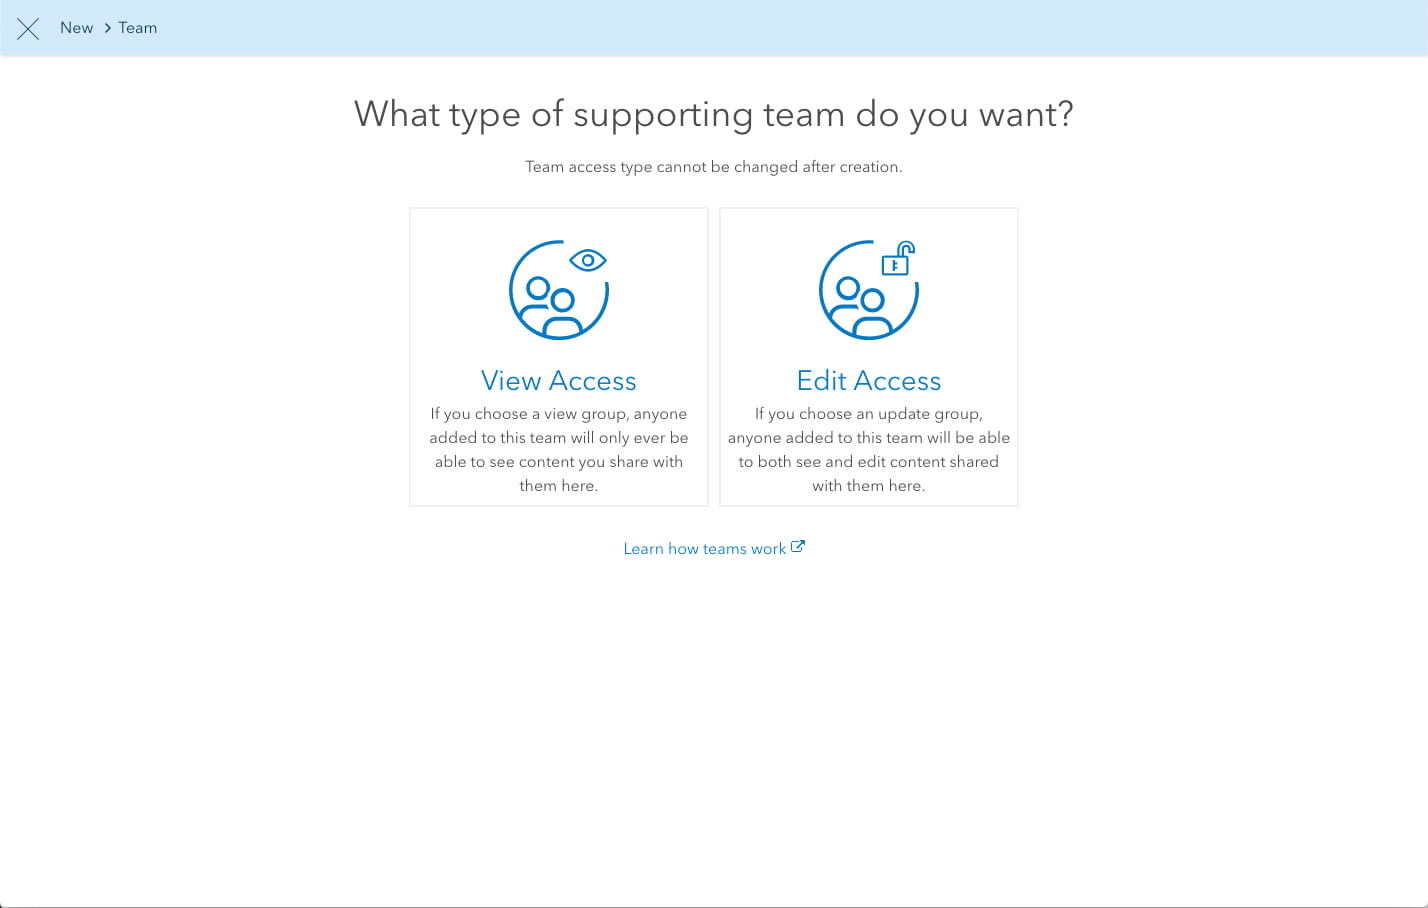 The new option to create a supporting team with edit access is available next to the option to create a supporting team with view access.